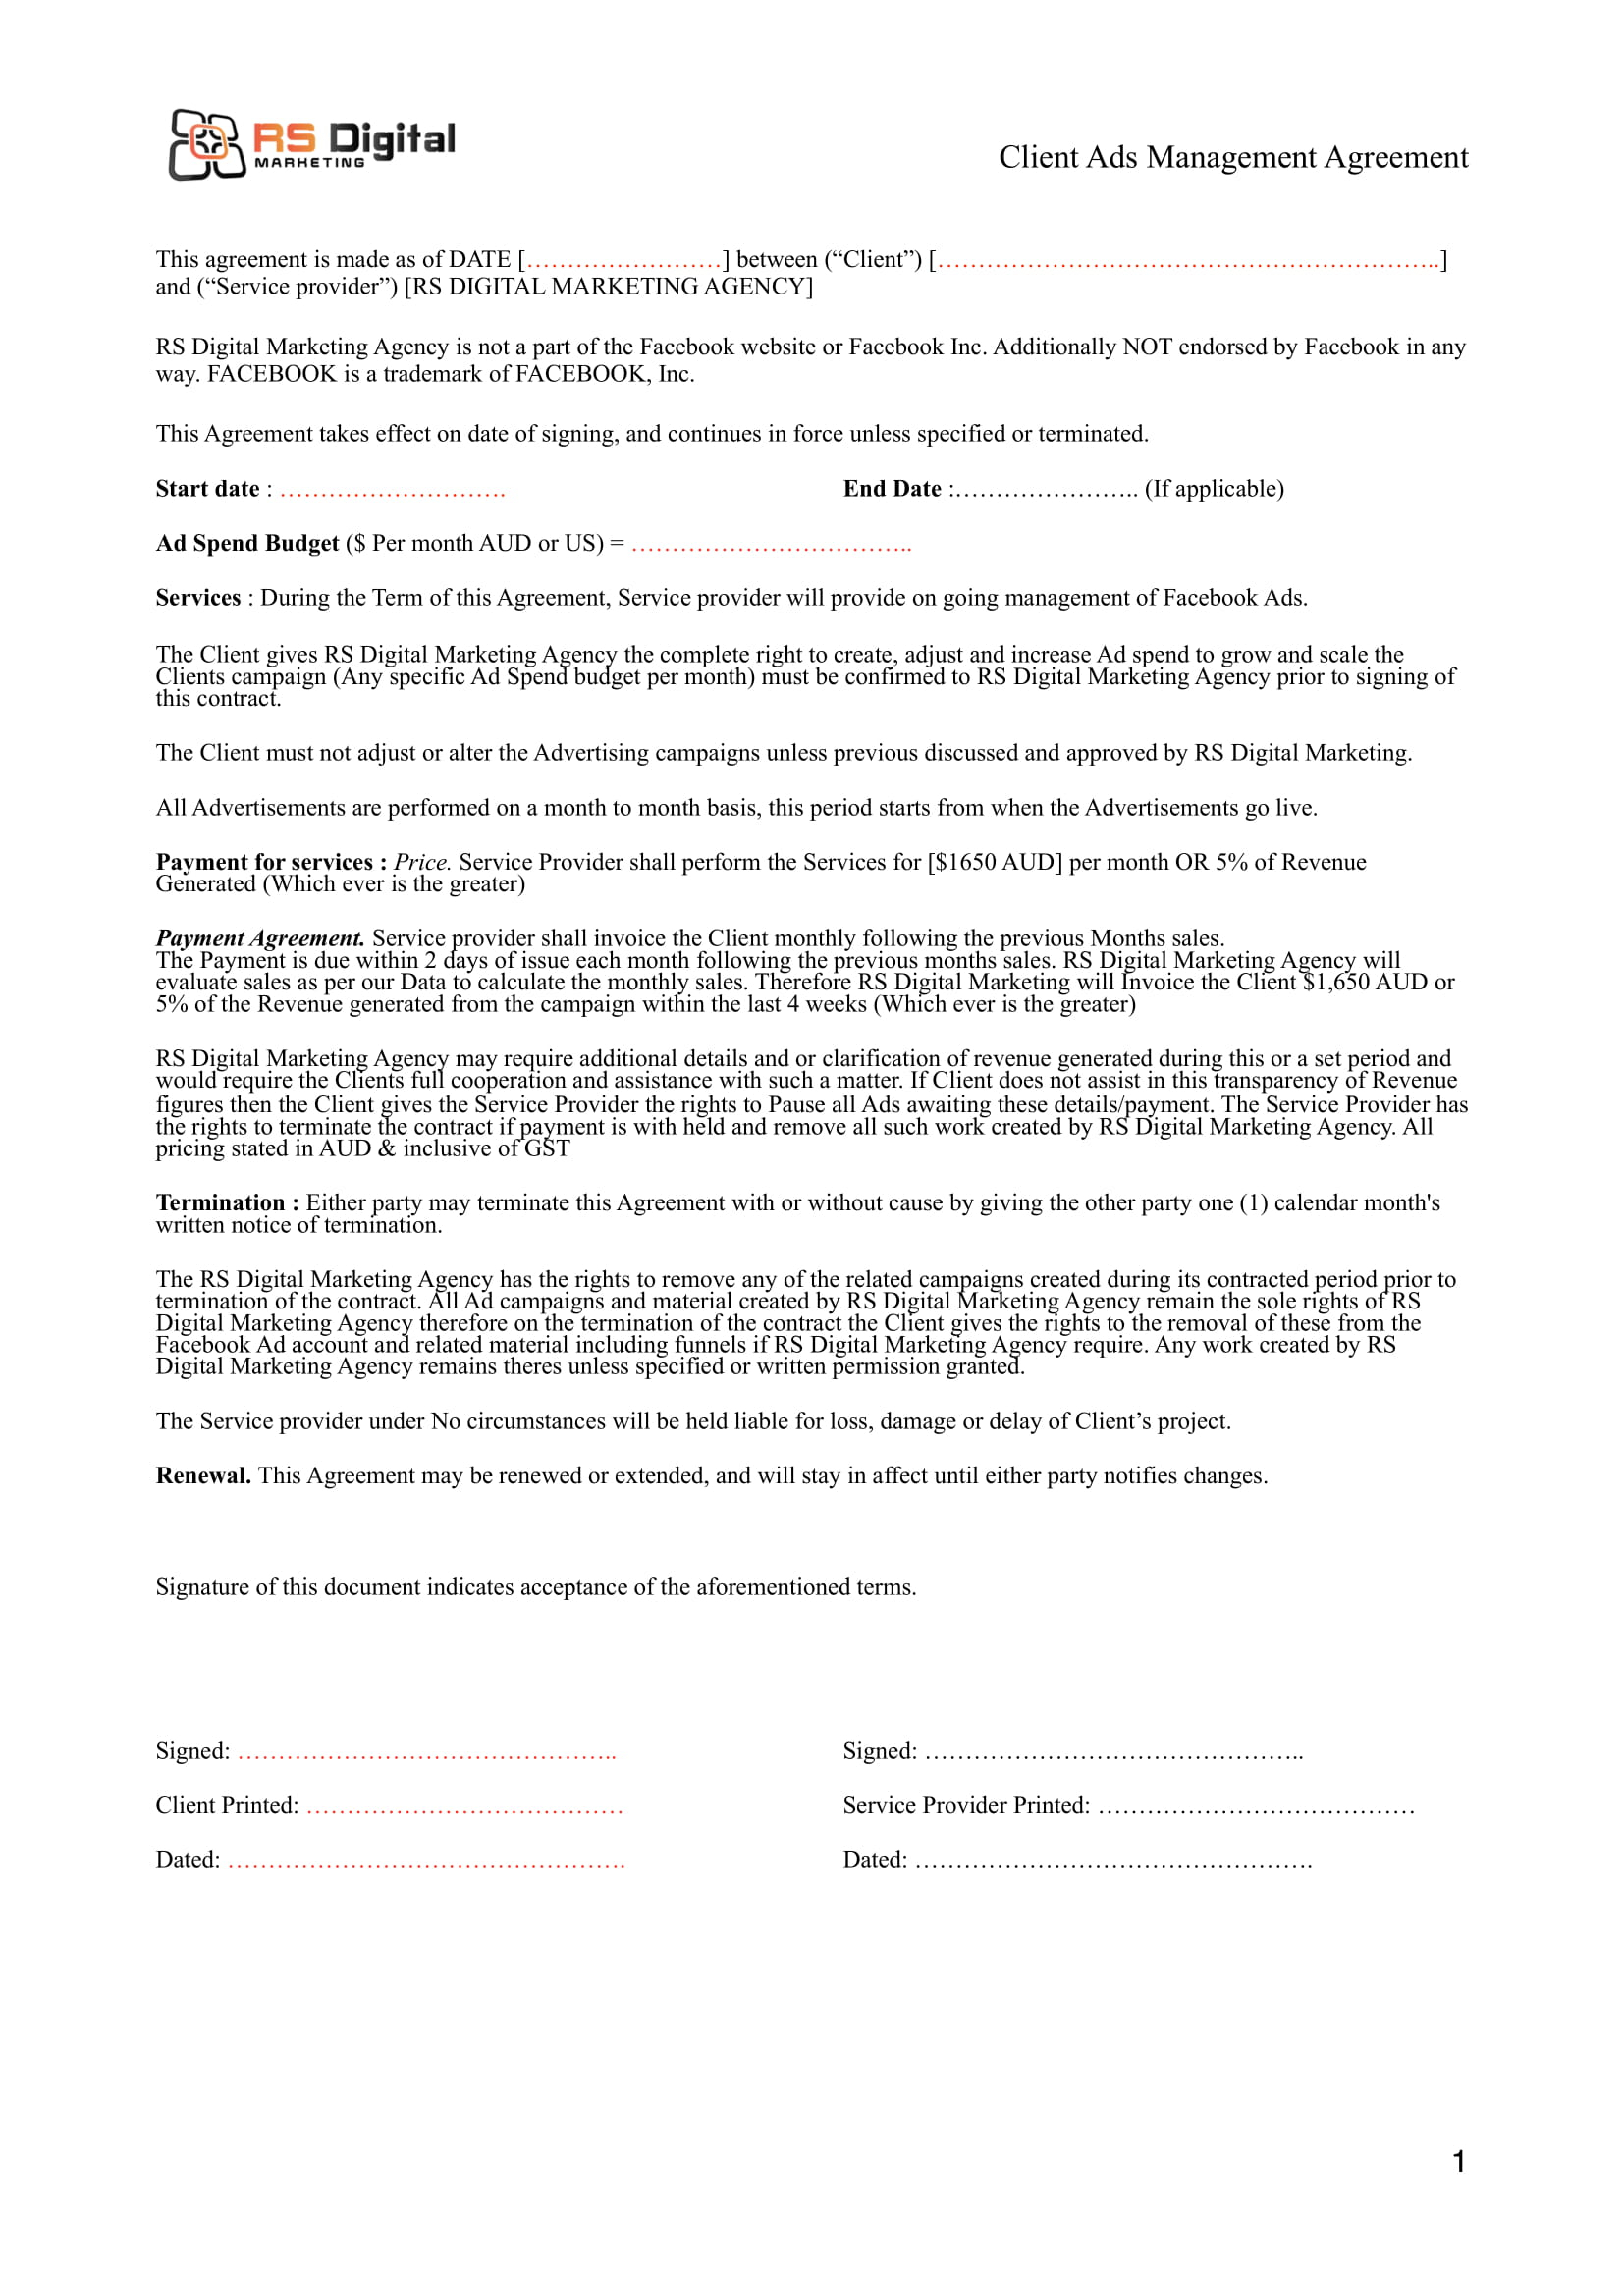 Online Marketing Agreement 29 Marketing Agreement Templates And Examples Pdf Word Pages